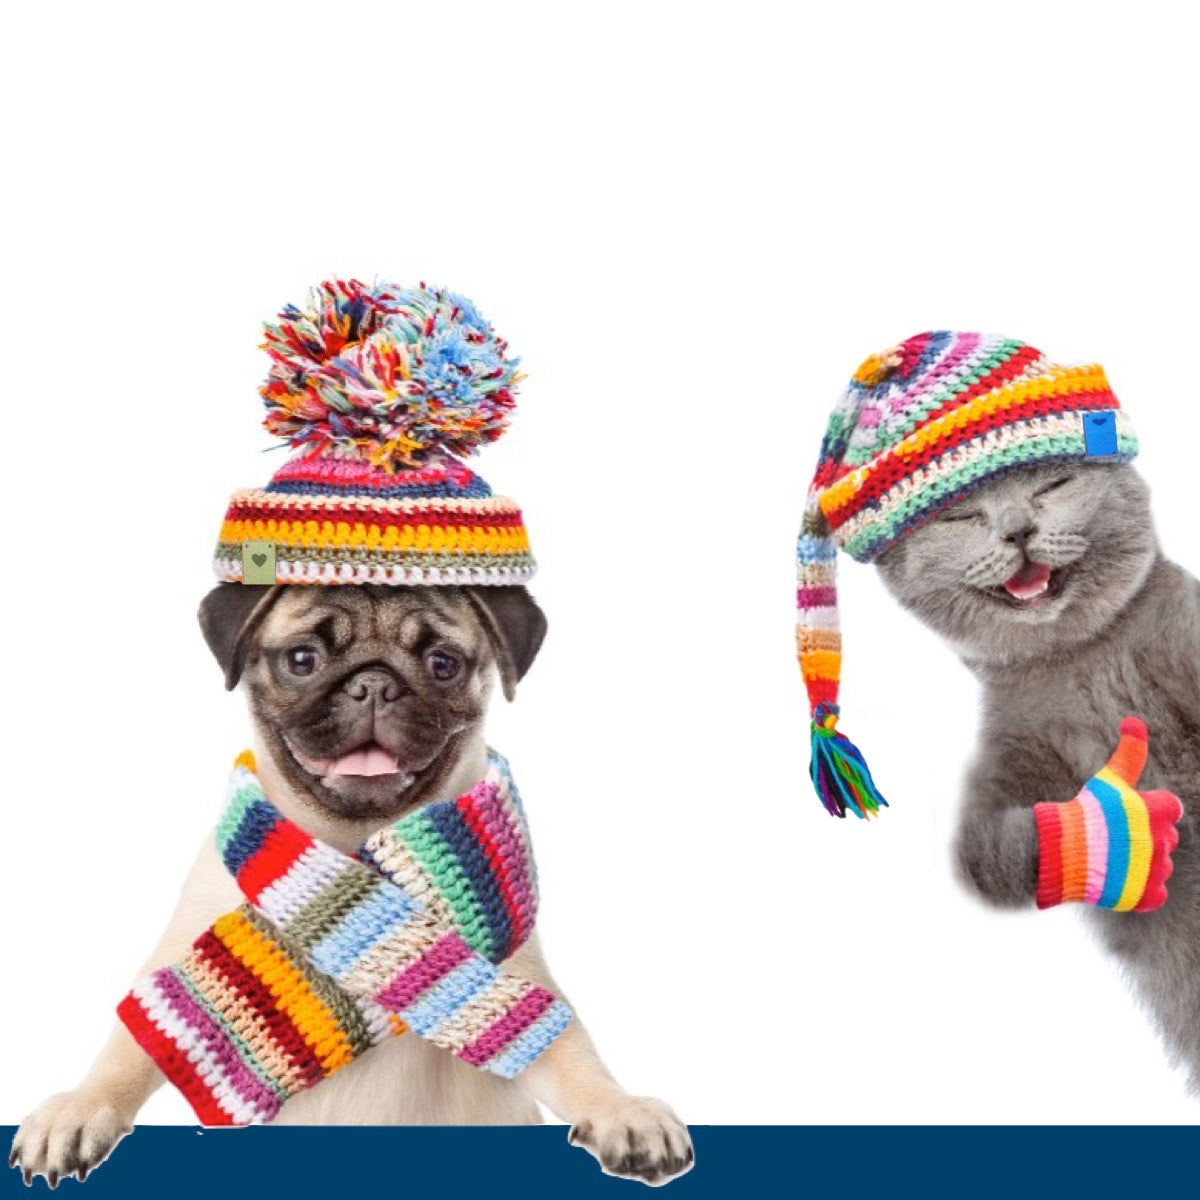 20% off hat flair with a dog and cat in knitted accessories